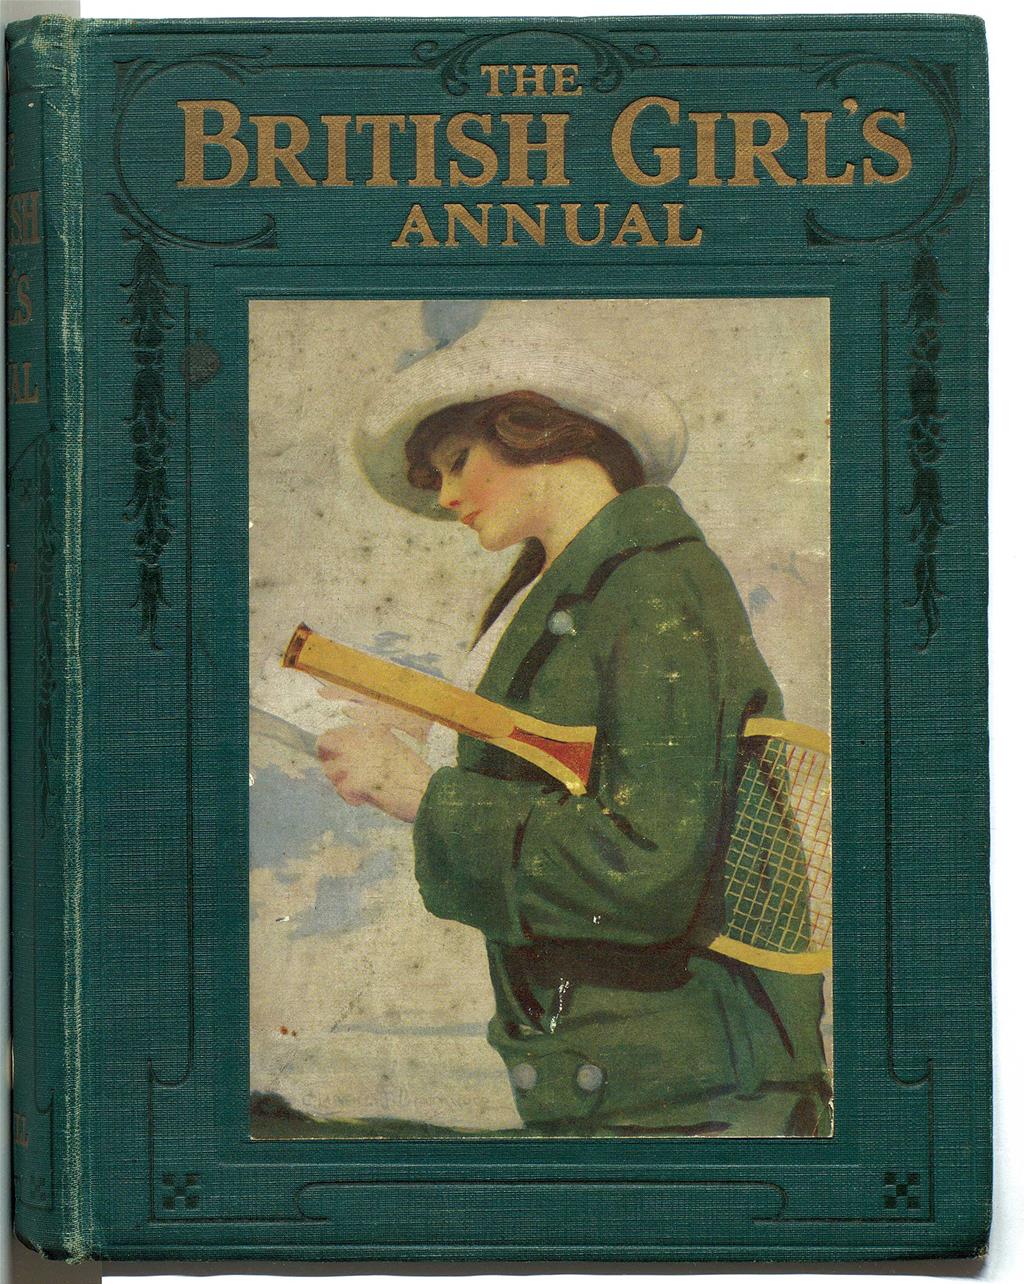 The British Girl’s Annual cover image